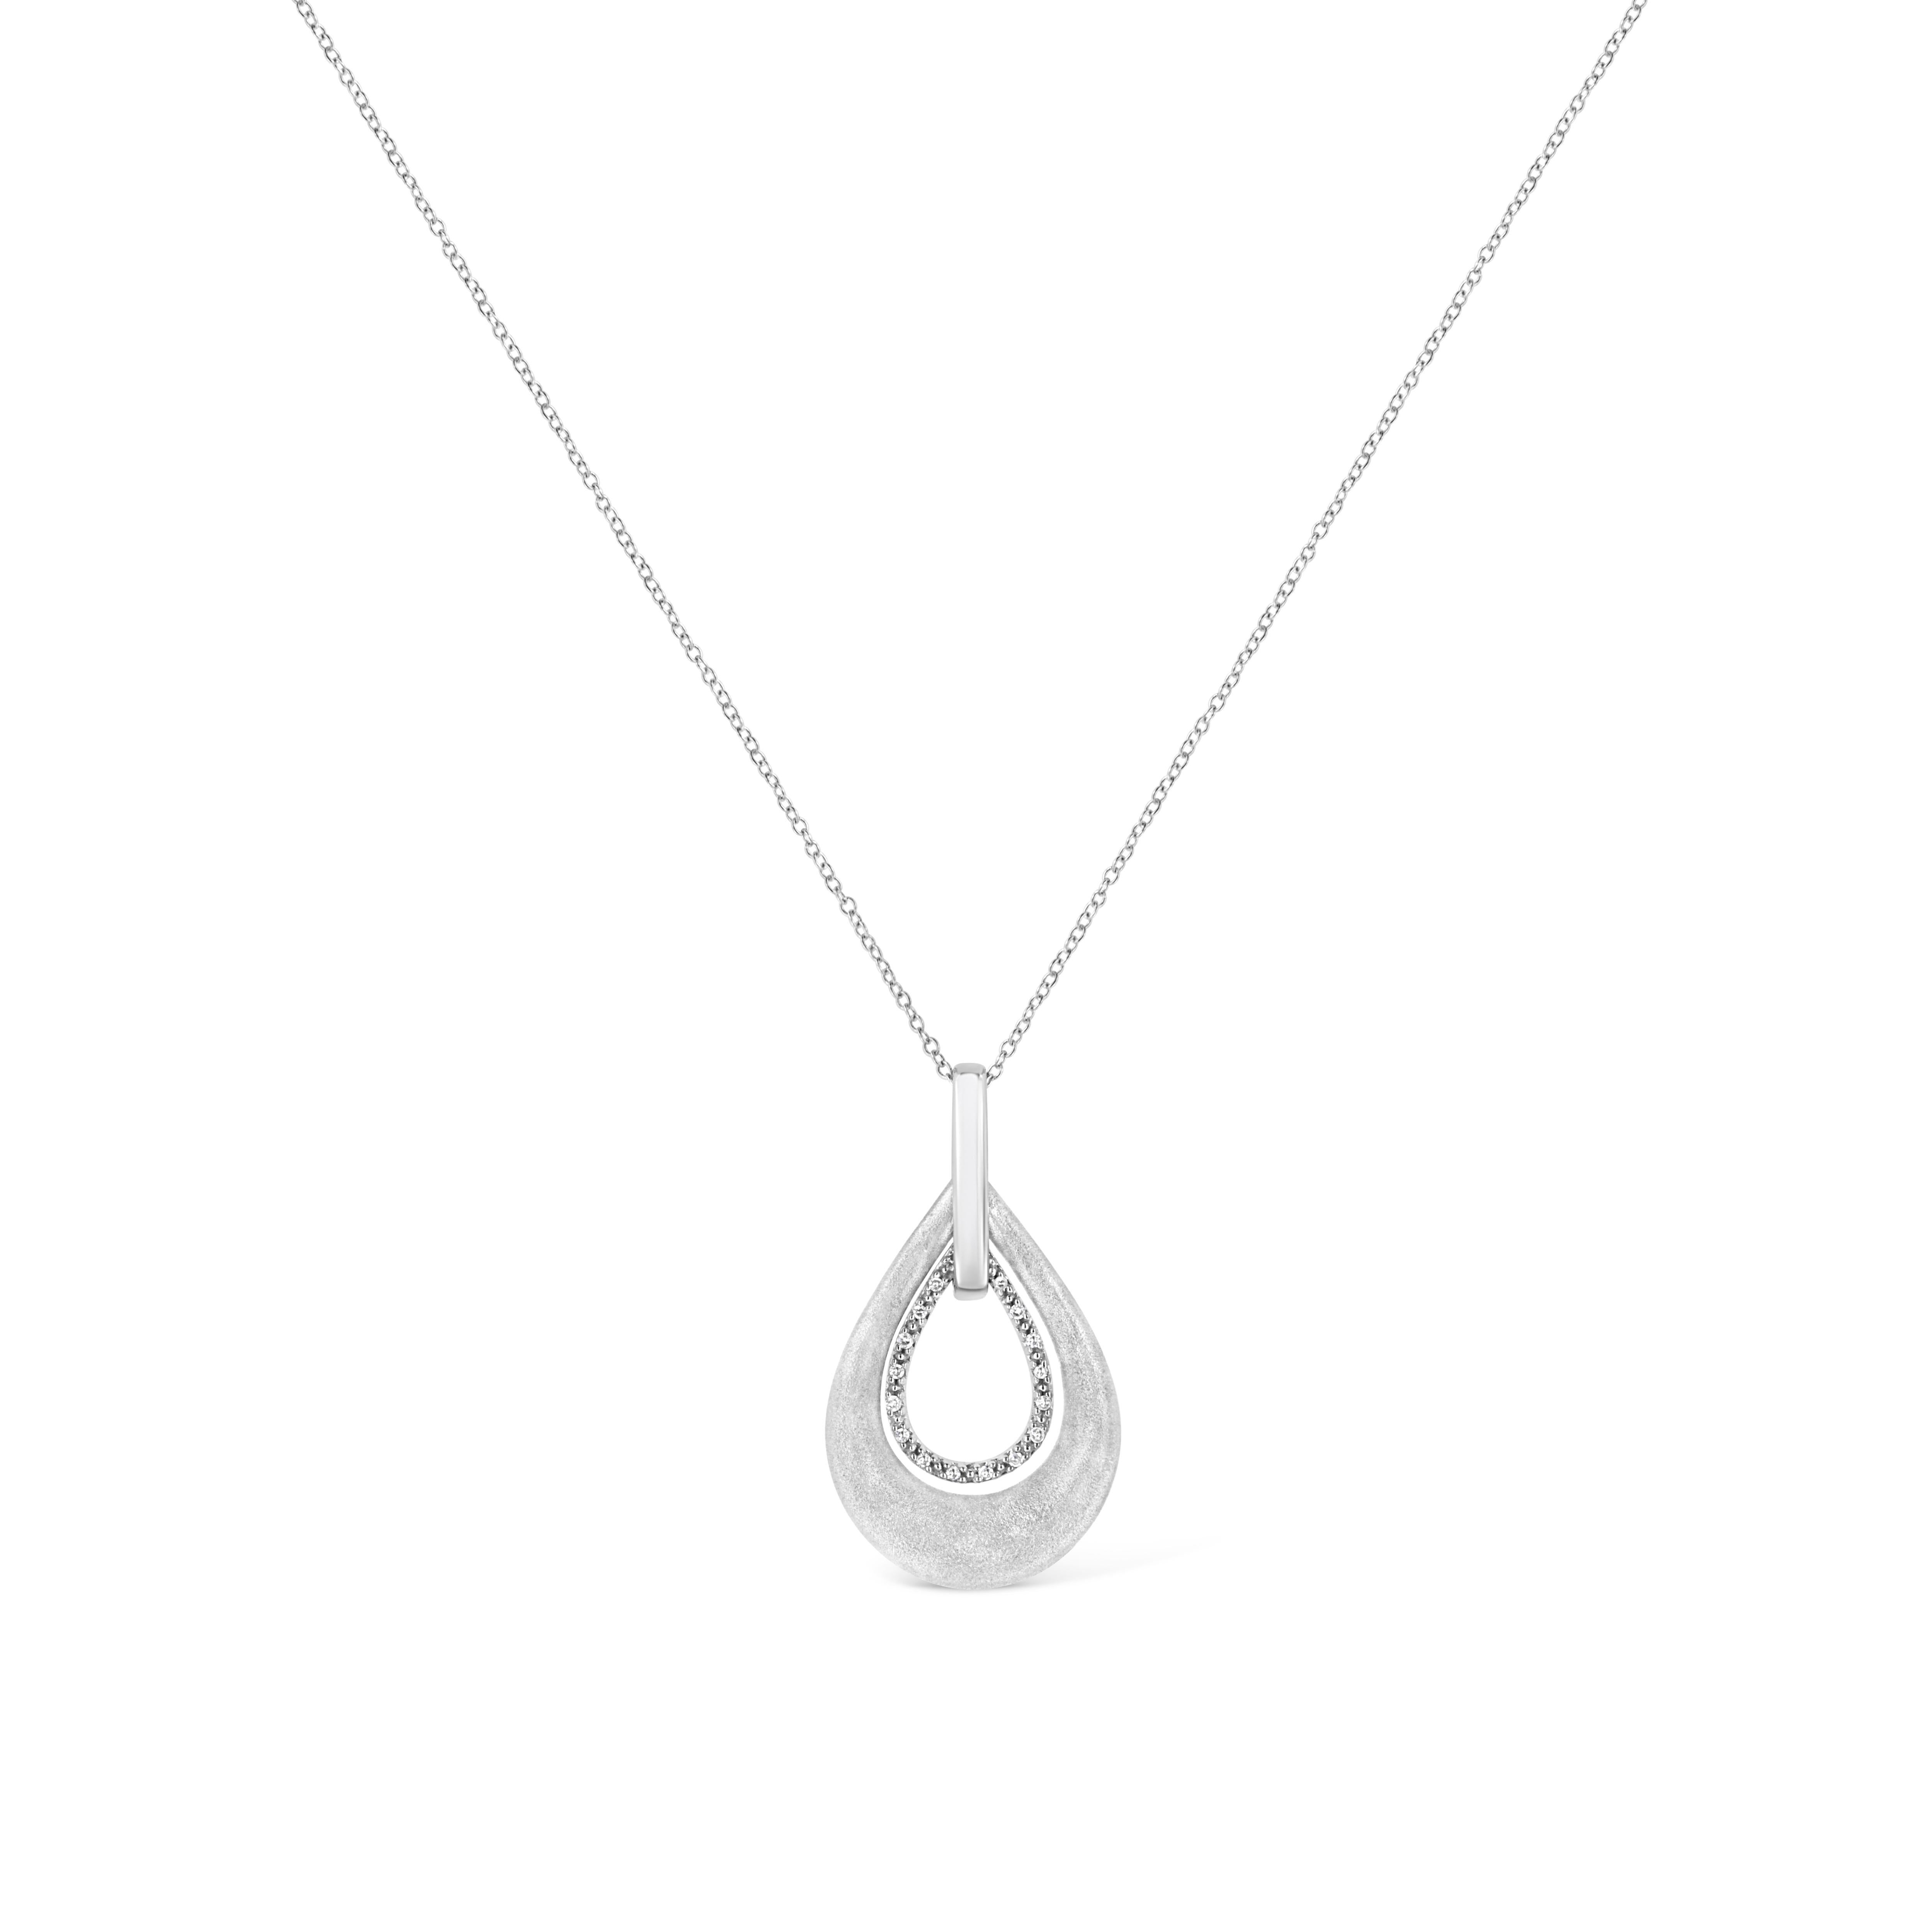 Make her feel glamorous with this radiant diamond fashion pendant. Fashioned in luminous sterling silver this pendant showcasing 18 sparkling prong set round cut diamonds, set on pear motif and dangles from a shimmering cable chain. Total diamond